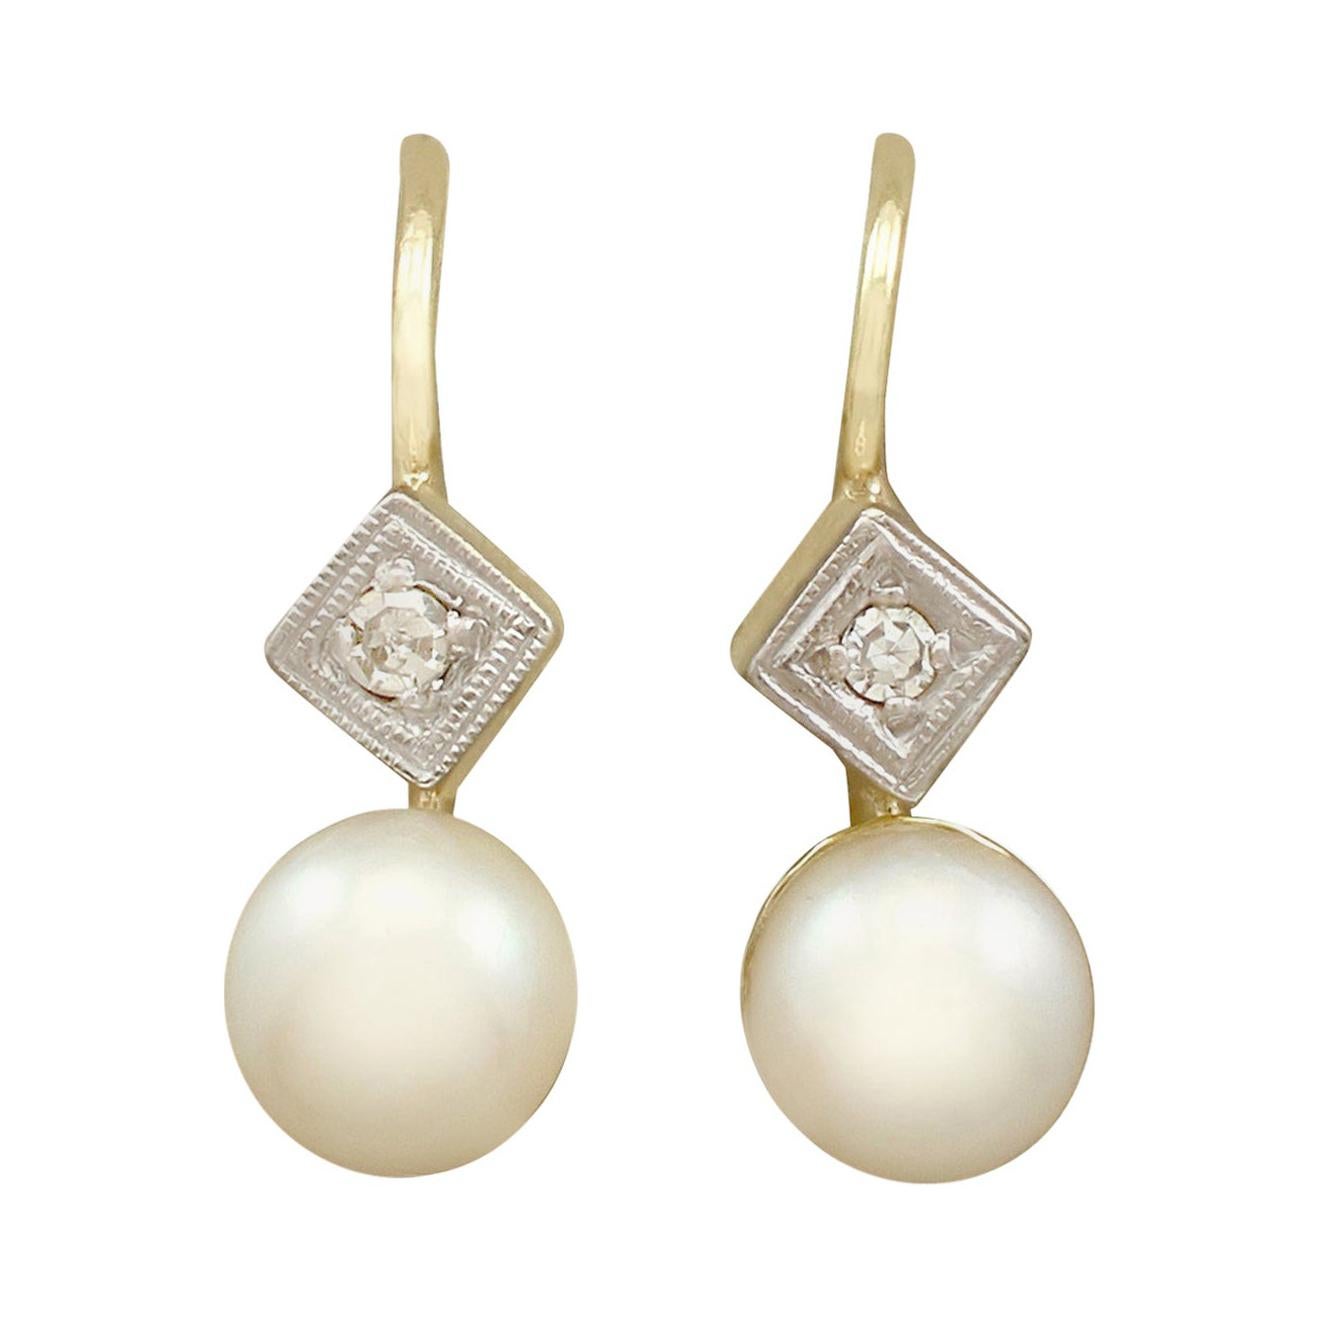 An impressive pair of antique pearl and 0.06 carat diamond, 14 karat yellow gold and 14 karat white gold set drop earrings; part of our diverse antique jewellery and estate jewelry collections.

These fine and impressive 1930s pearl earrings have